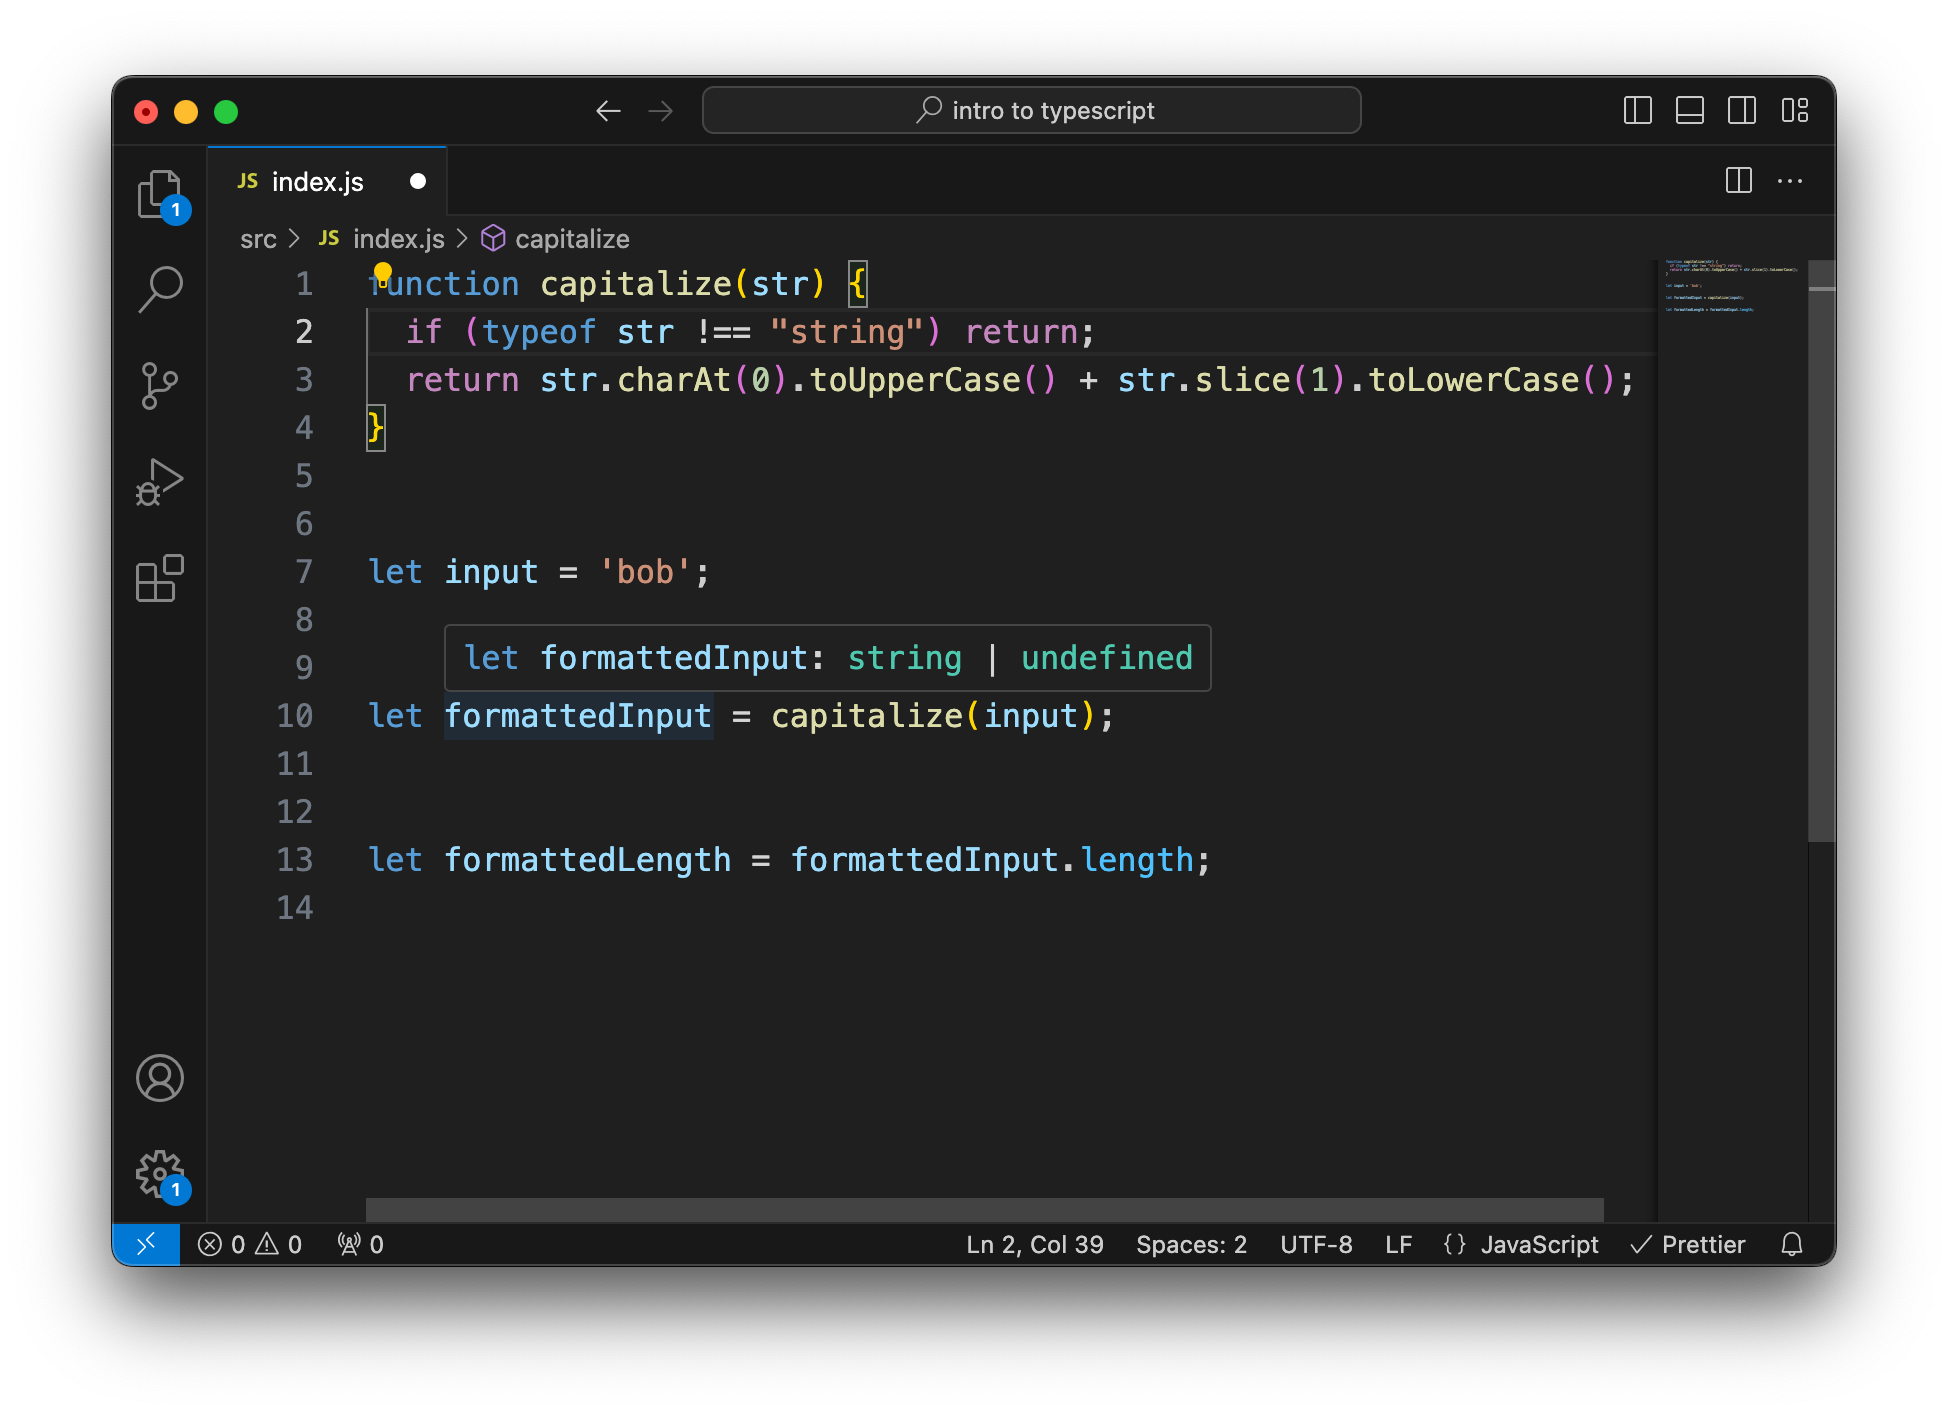 VS Code with the same simple JavaScript file as we had earlier. Except that now our capitalize function simply returns if its argument is not a string. The image shows that now the type of the returned value changed from any to string or undefined.